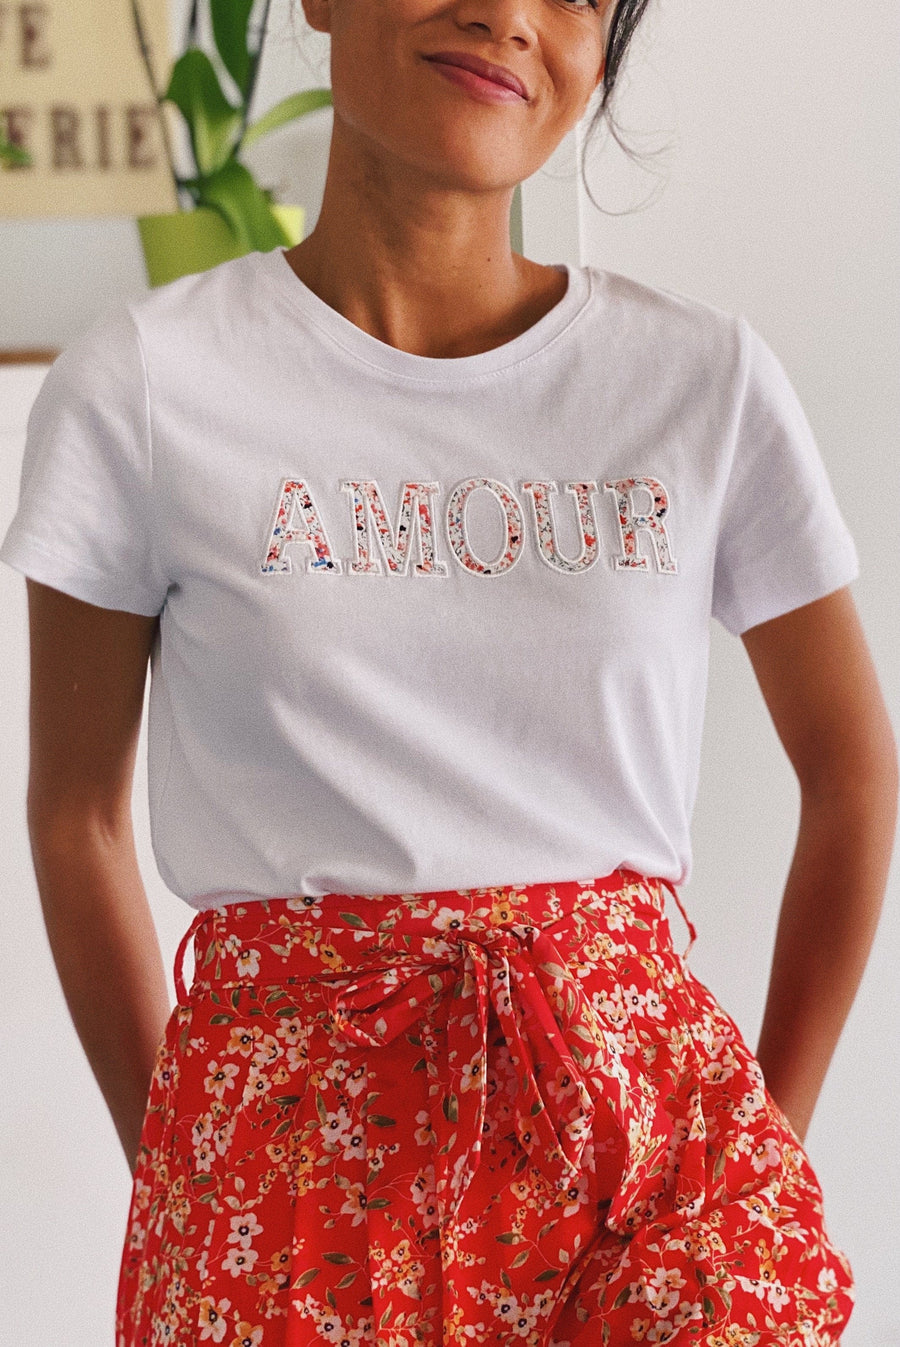 Amour t-shirt